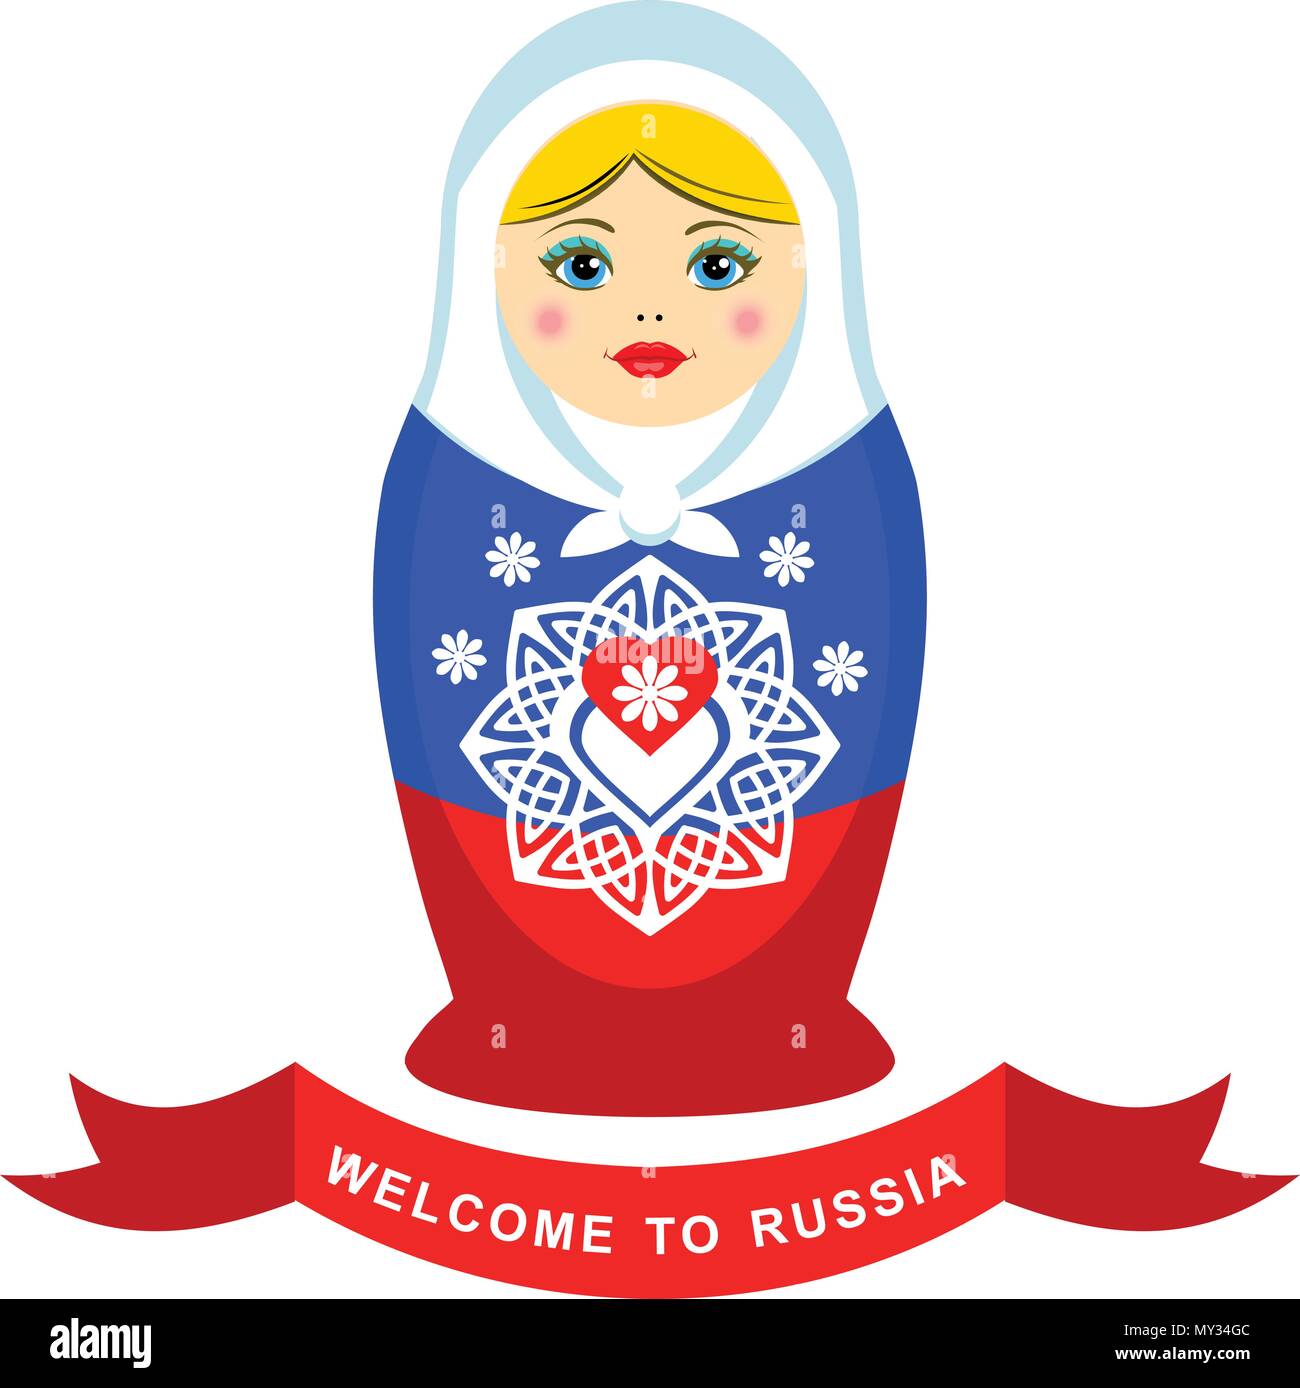 Russian nesting doll with ornamental heart element. Colors of Rissian flag. Welcome to Russia. Stock Vector